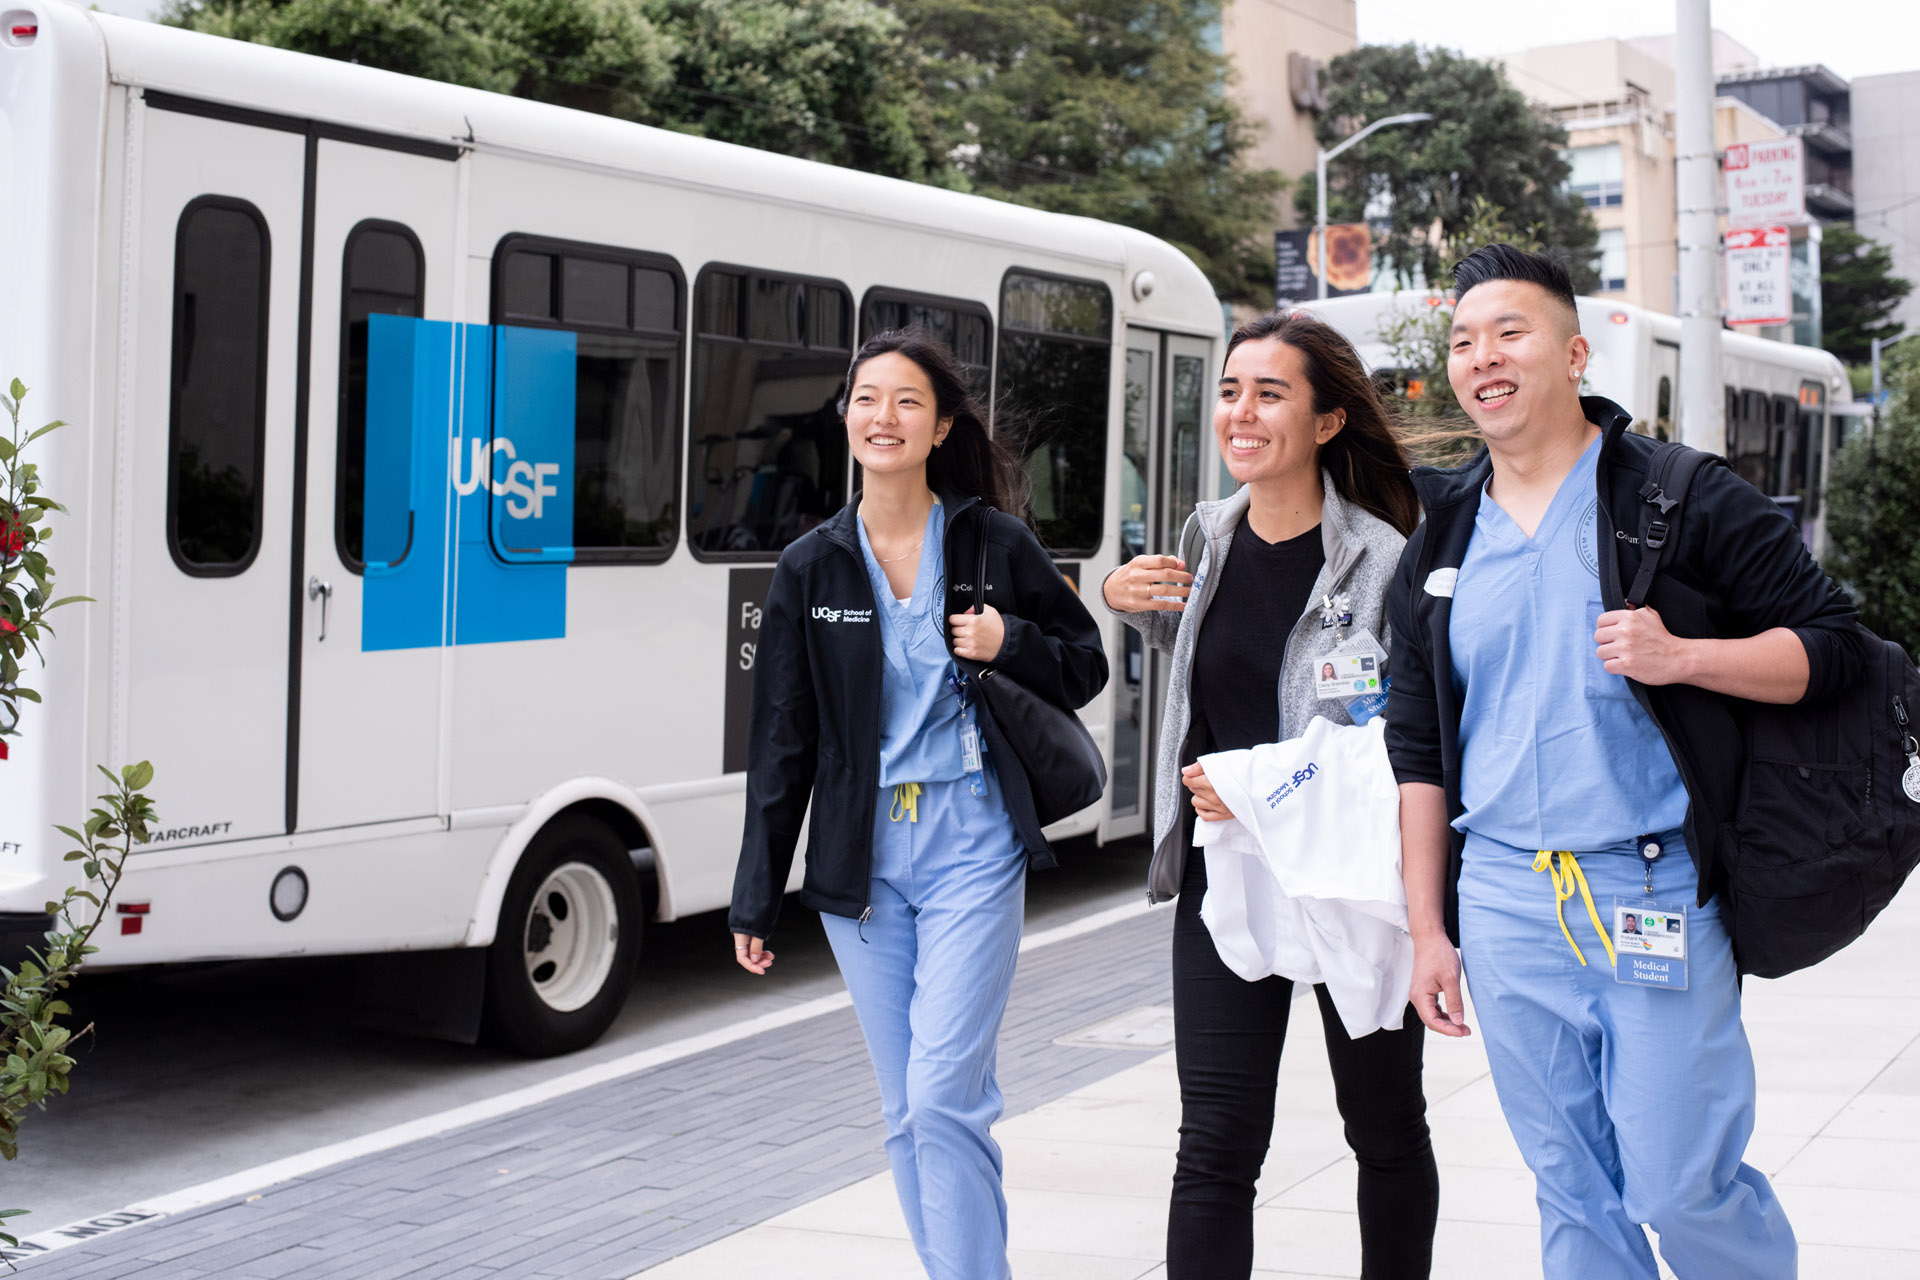 UCSF medical students Daisy Brambila, Emily Taketa, and Richard Ngo walk on Parnassus campus. A UCSF shuttle is parked in the background.